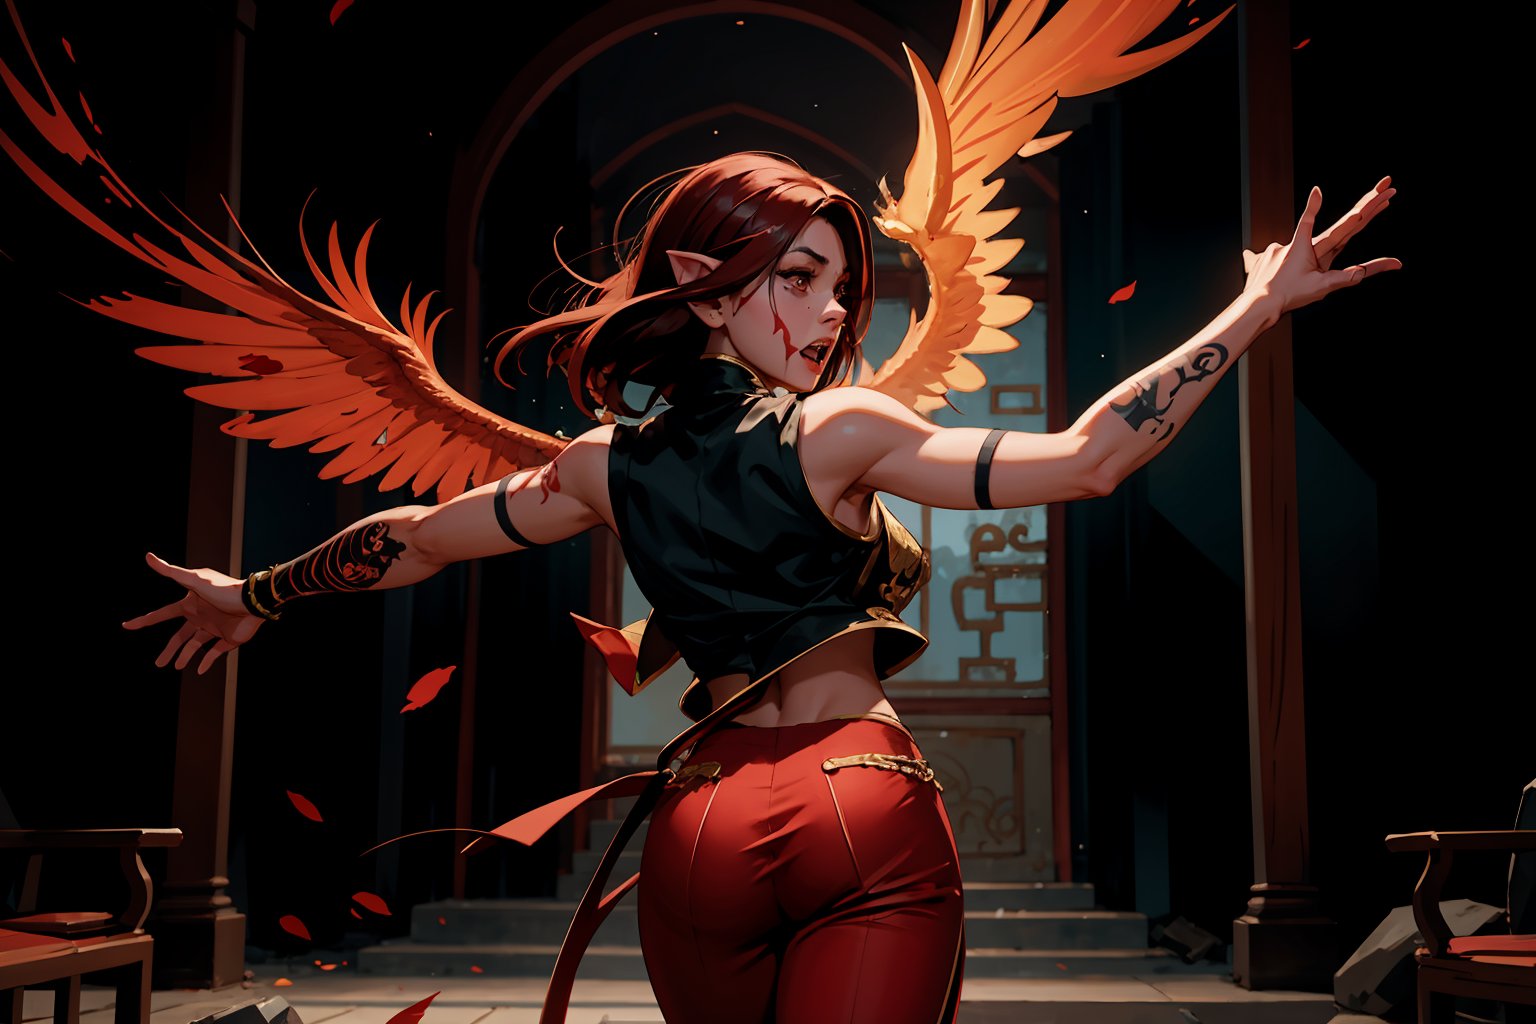 Chinese mythology, solo, 1female, monster_girl, short hair, dark red hair, (facial marks), fierce face, evil face, fangs, sexy lips, (pointed ears), (dark skin), strong body, (phoenix tattoo), (a single wing behind:1.2), dark red vest, long pants, a heavenly guardian, its normally radiant aura now dimmed by mortal wounds, bursts into the grand hall with frantic urgency. The once-stalwart warrior's usually unyielding expression is replaced by a look of desperation as it rushes to convey crucial information to the gathered officials. In a chaotic flurry of motion, the injured god stumbles forward, its usually immaculate attire now disheveled and bloodied, dynamic pose, (captured in mid-leap:1.2), (from behind:1.2), Chinese martial arts animation style